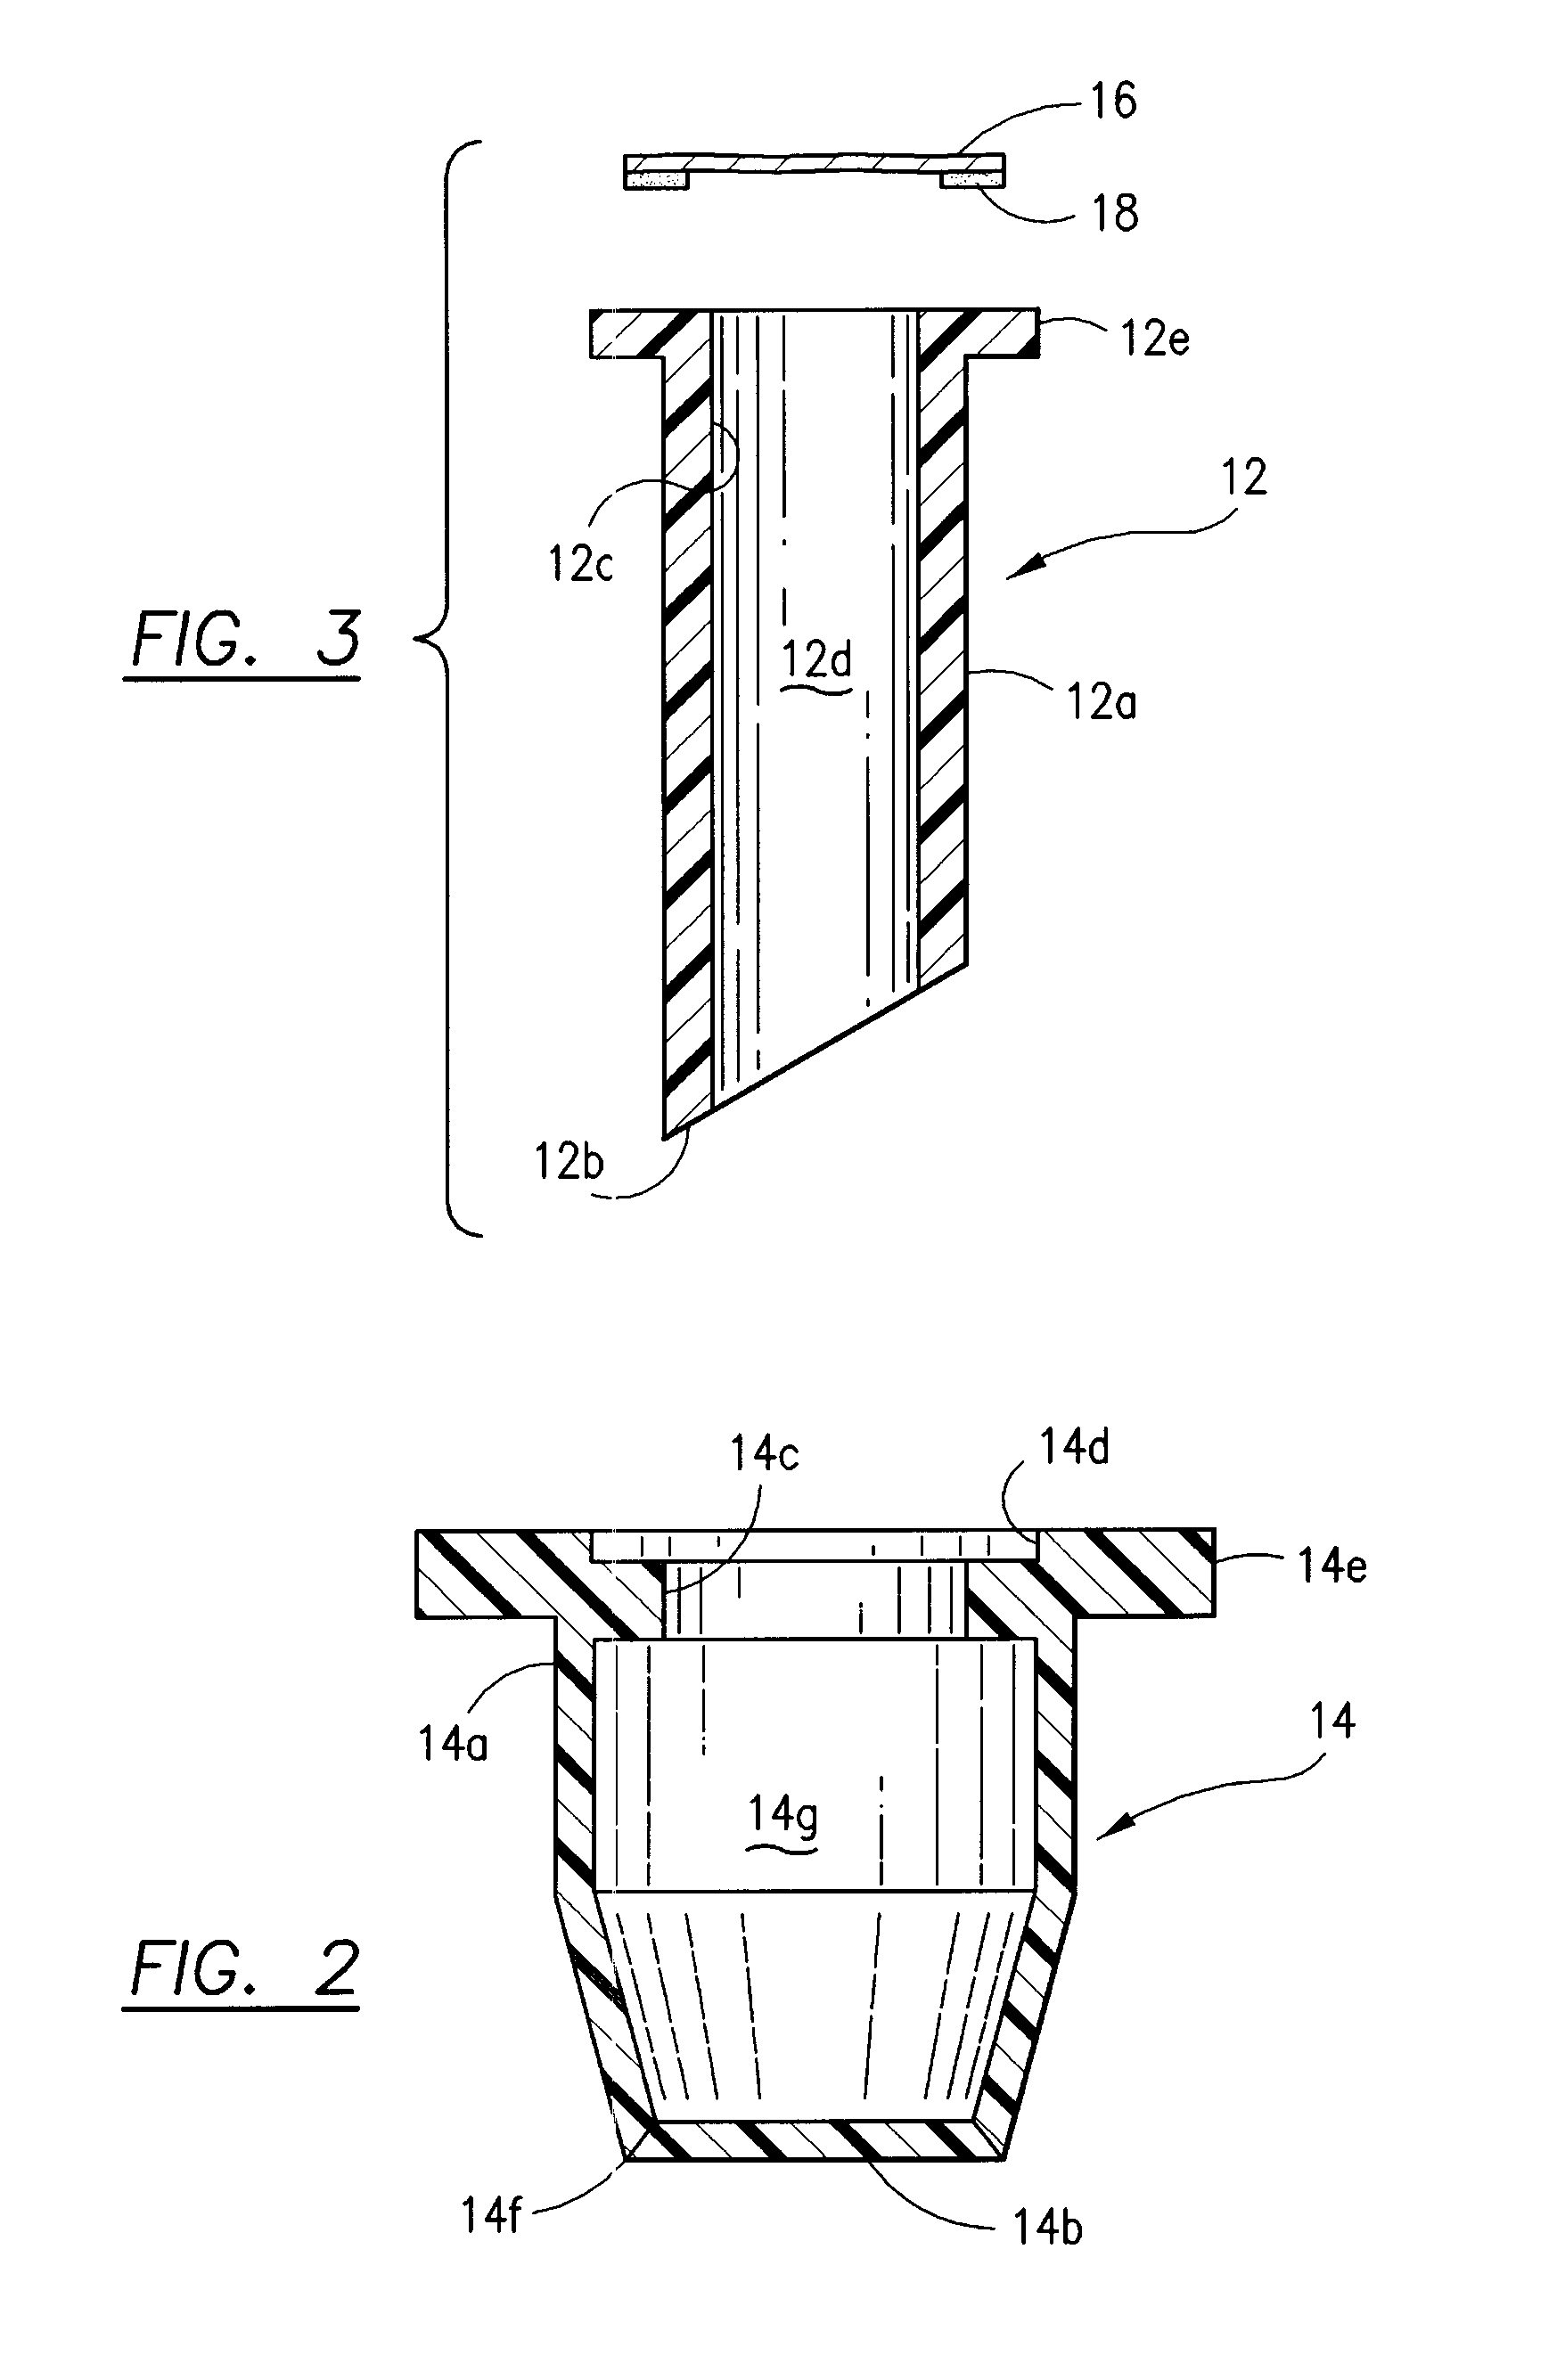 Liquid chamber cap with compartment for use with injectables